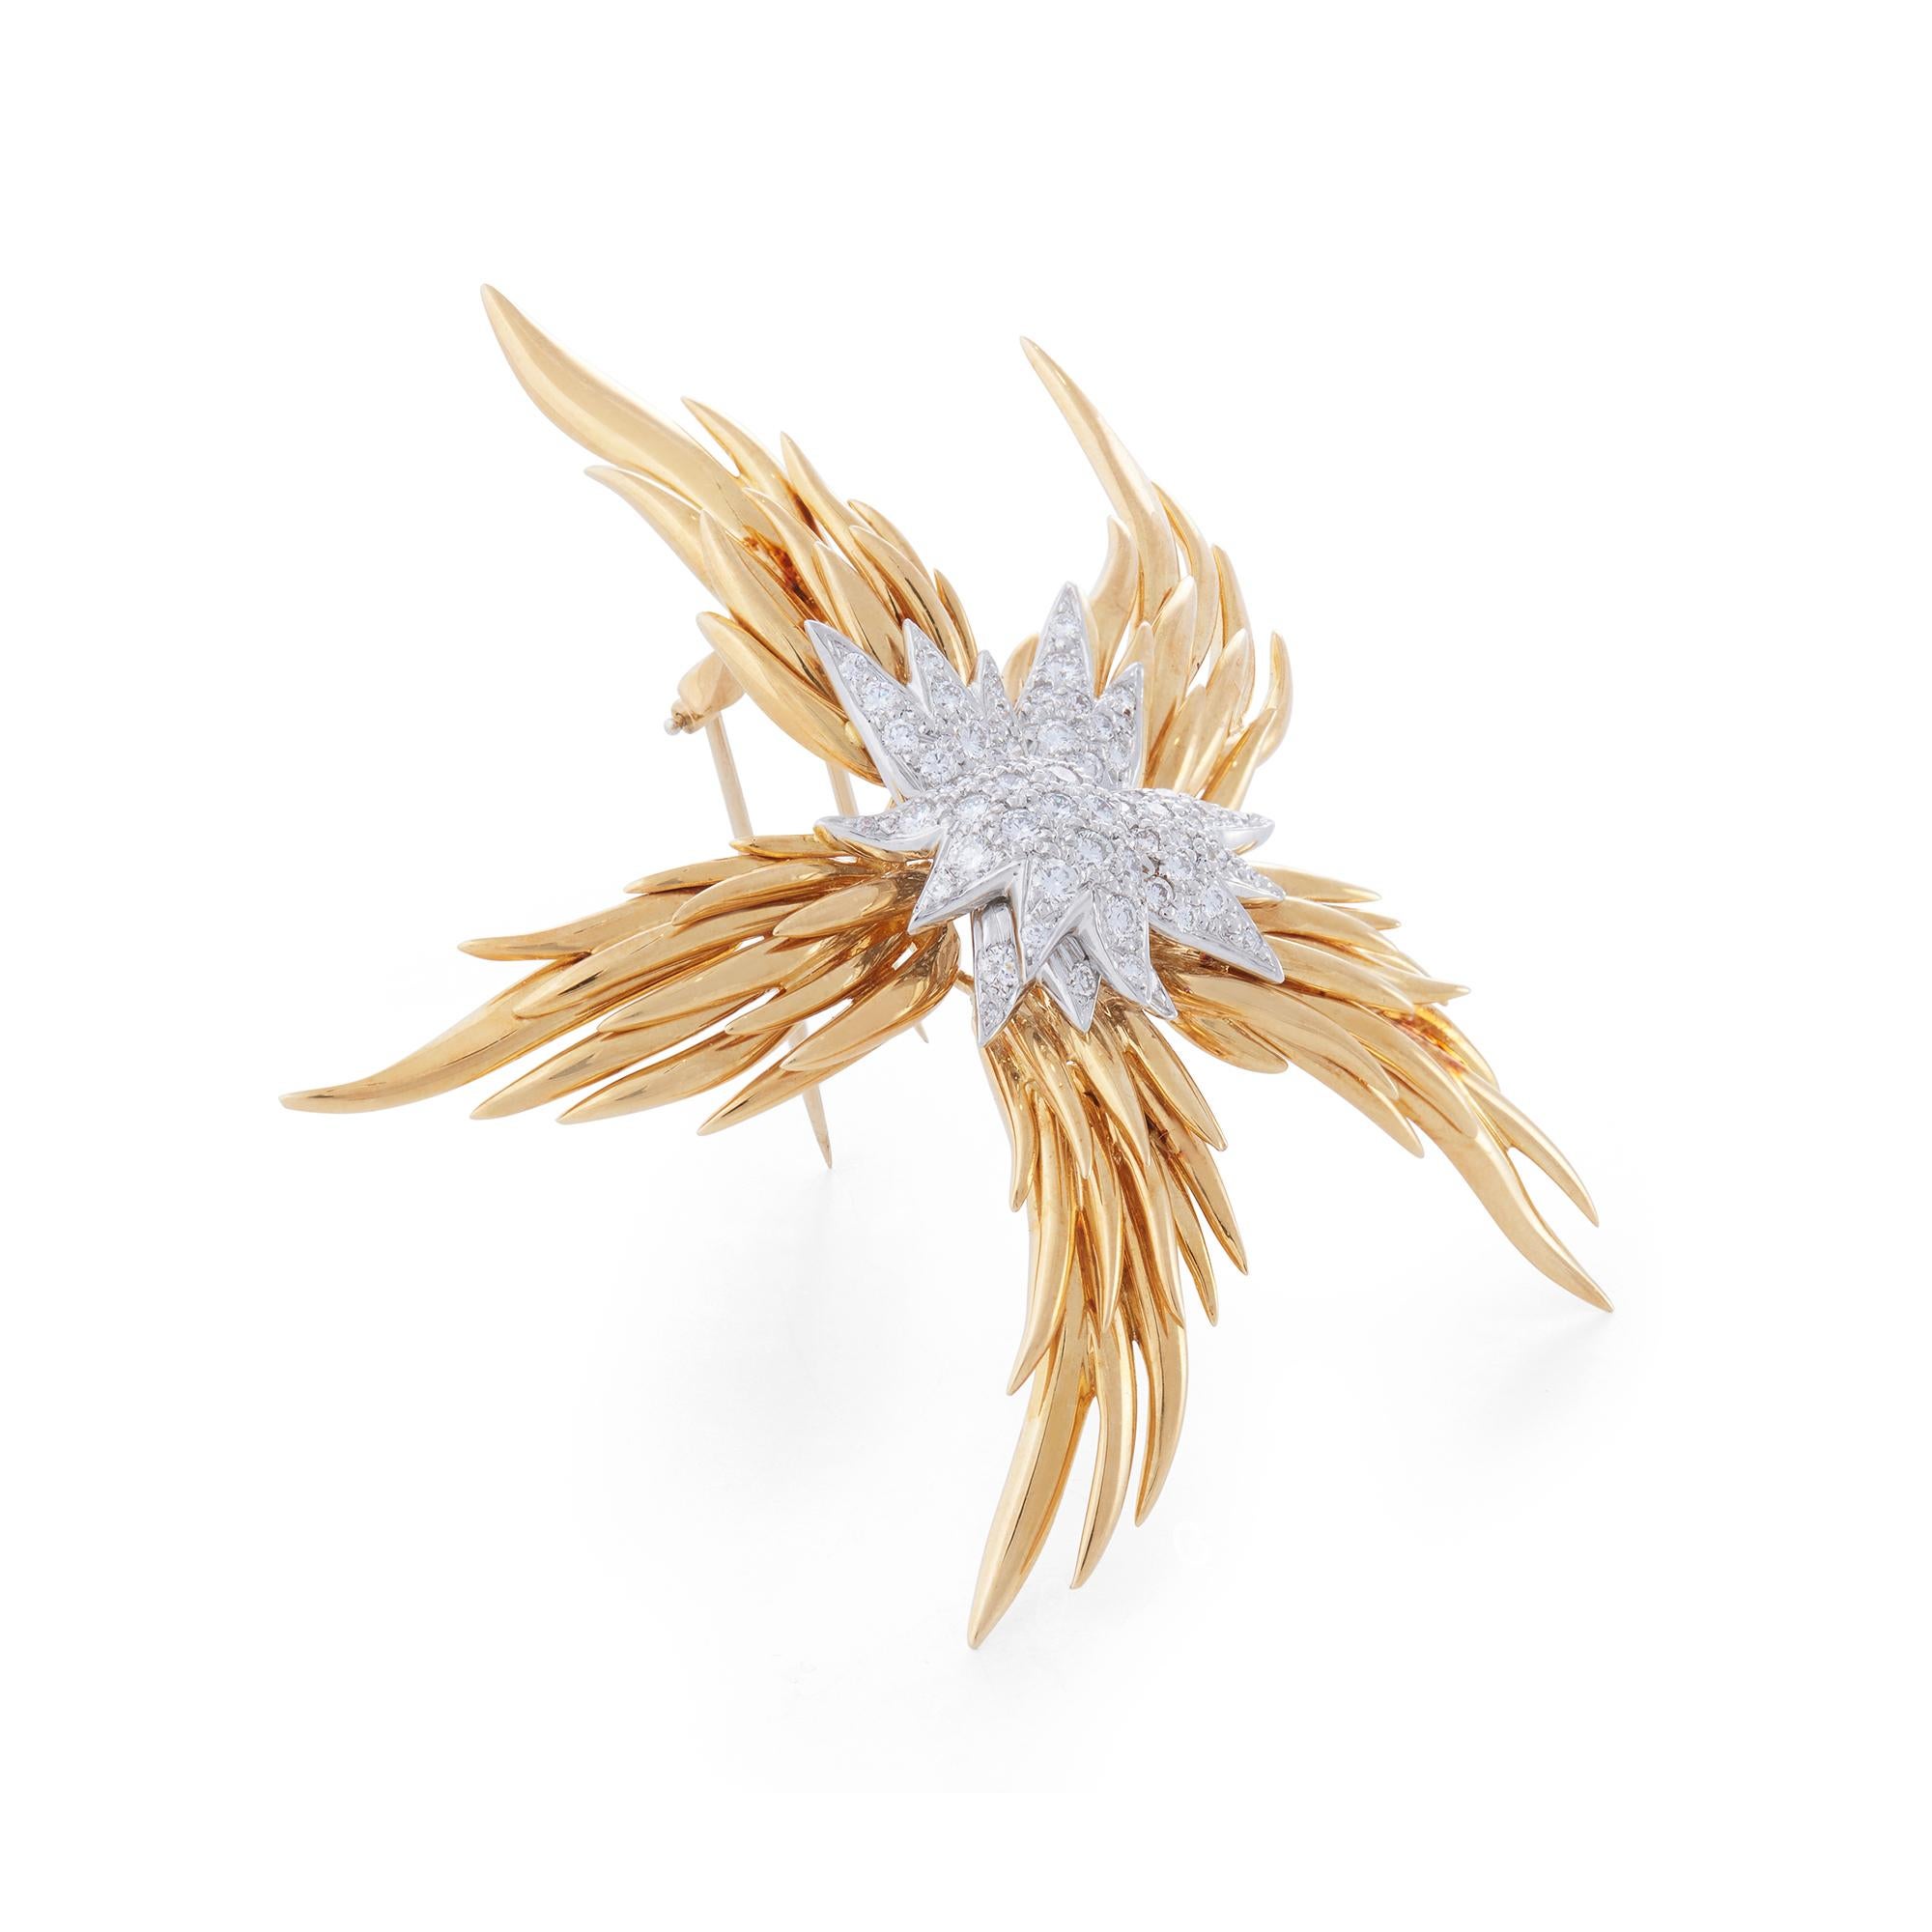 Authentic Jean Schlumberger for Tiffany & Co. Paris Flames brooch crafted in 18 karat yellow gold and platinum. Designed as a star- shaped flame and enhanced by 63 round brilliant cut diamonds (G-H, VS) weighing an estimated 1.30 carats total. The